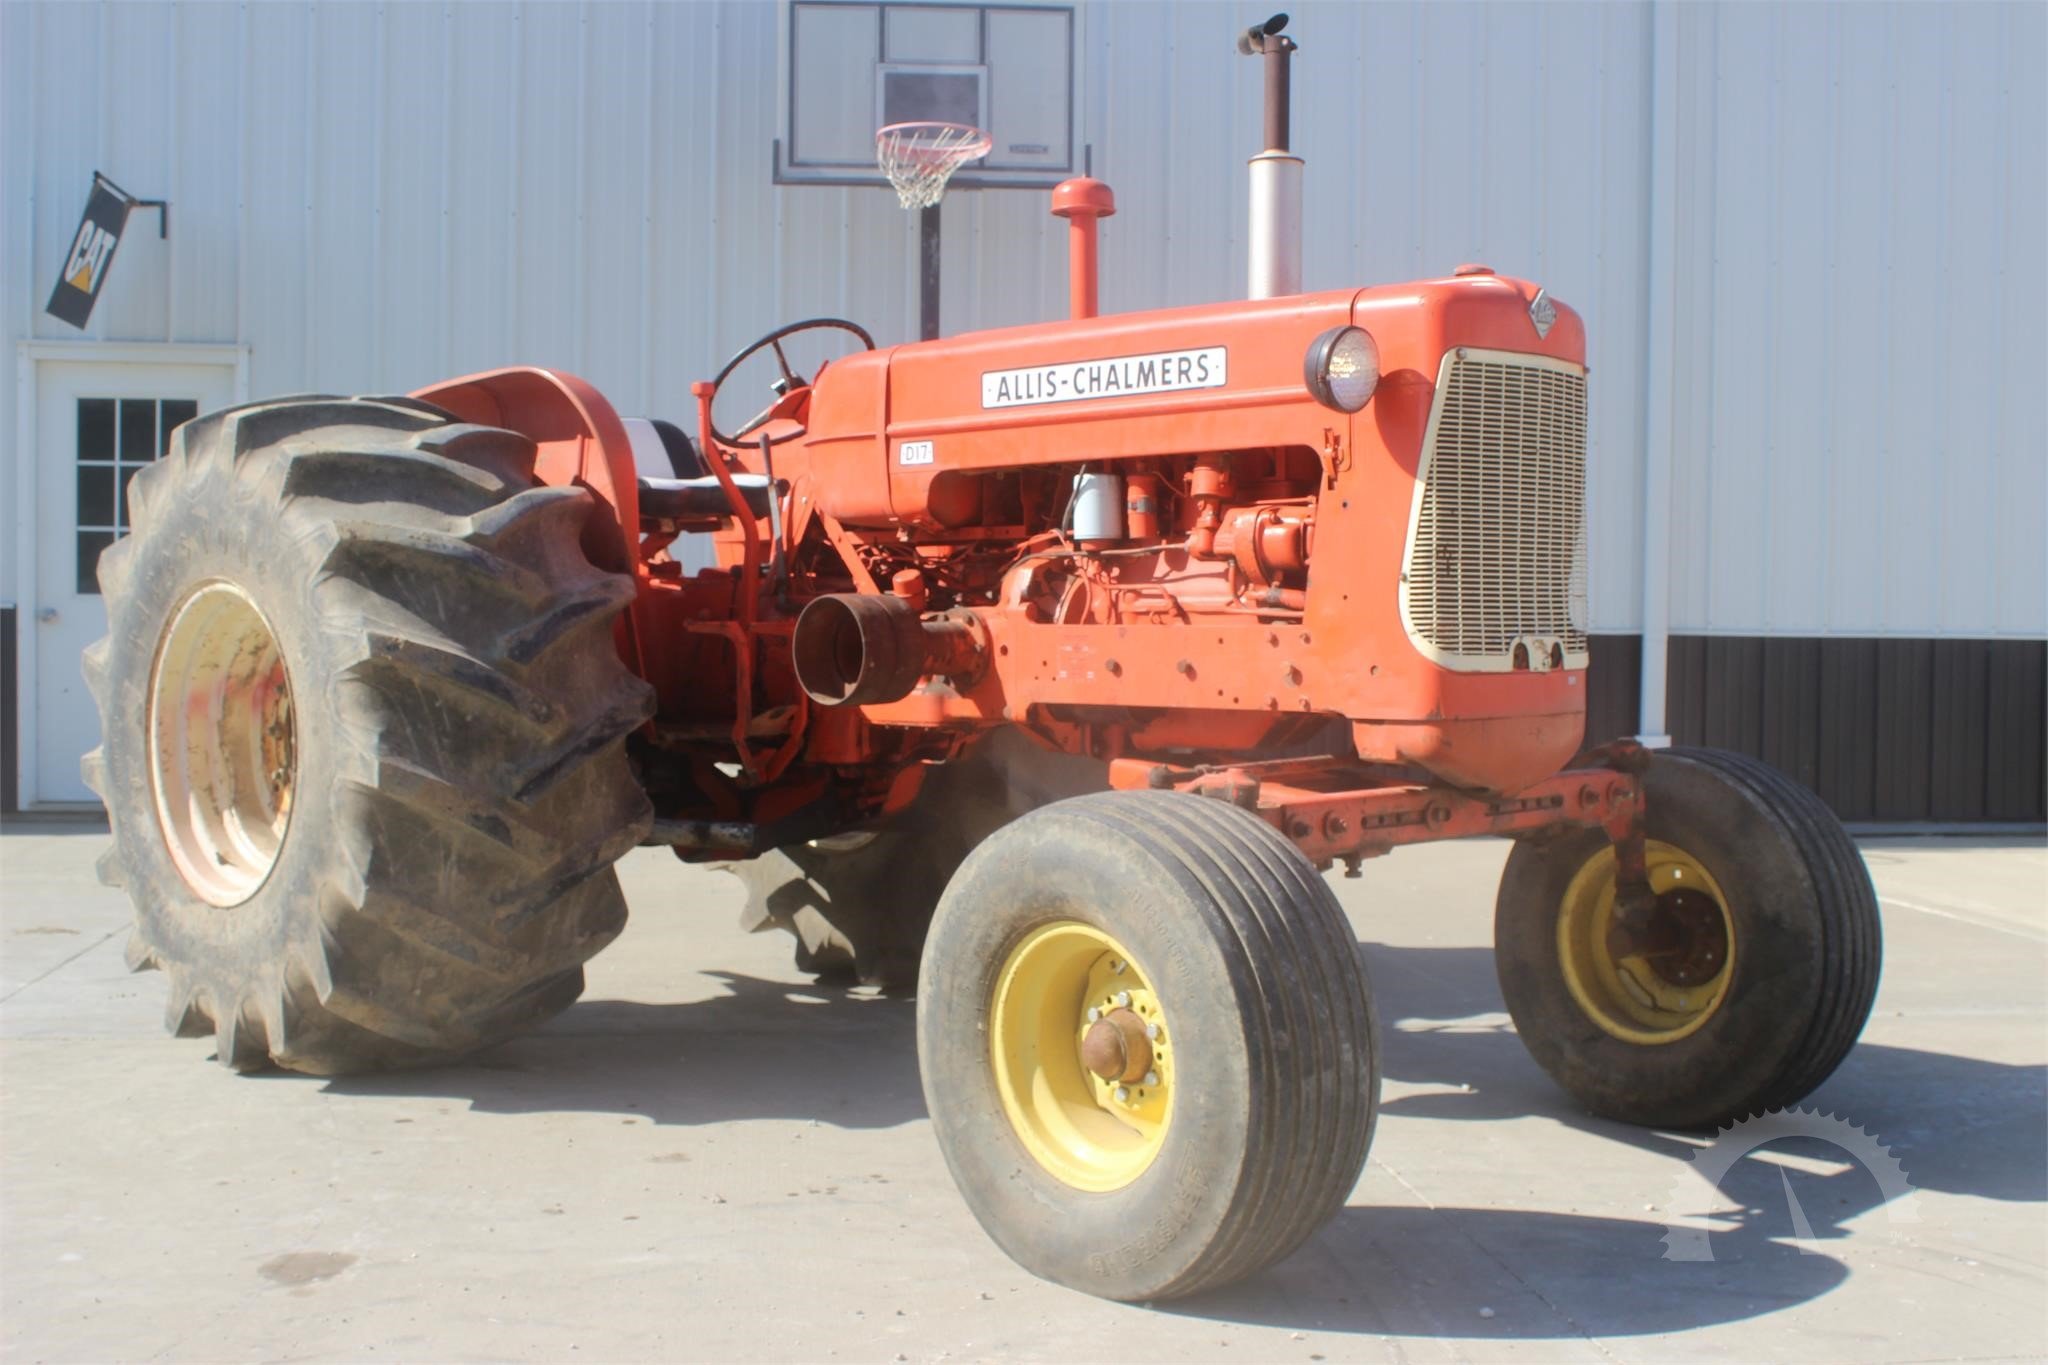 Allis Chalmers D17 tractor information